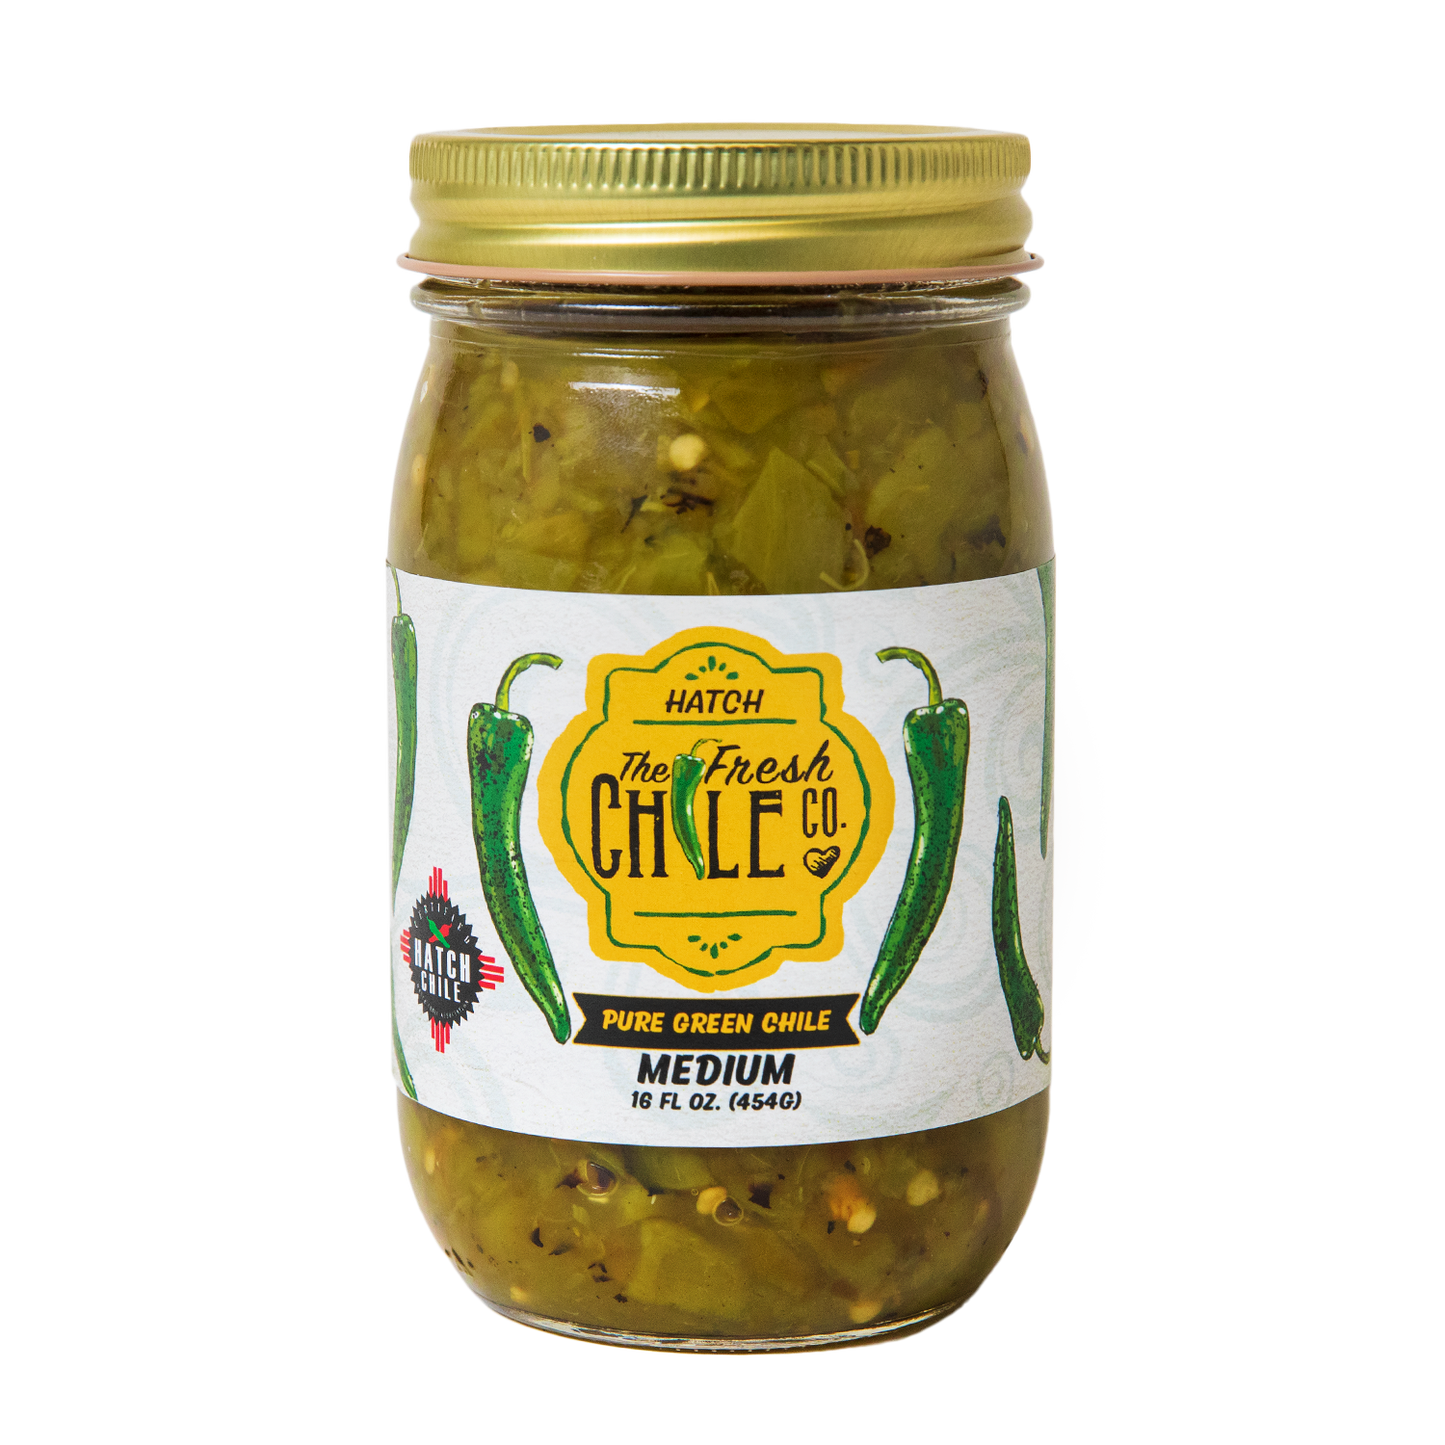 Traditional Hatch Chile Variety Pack